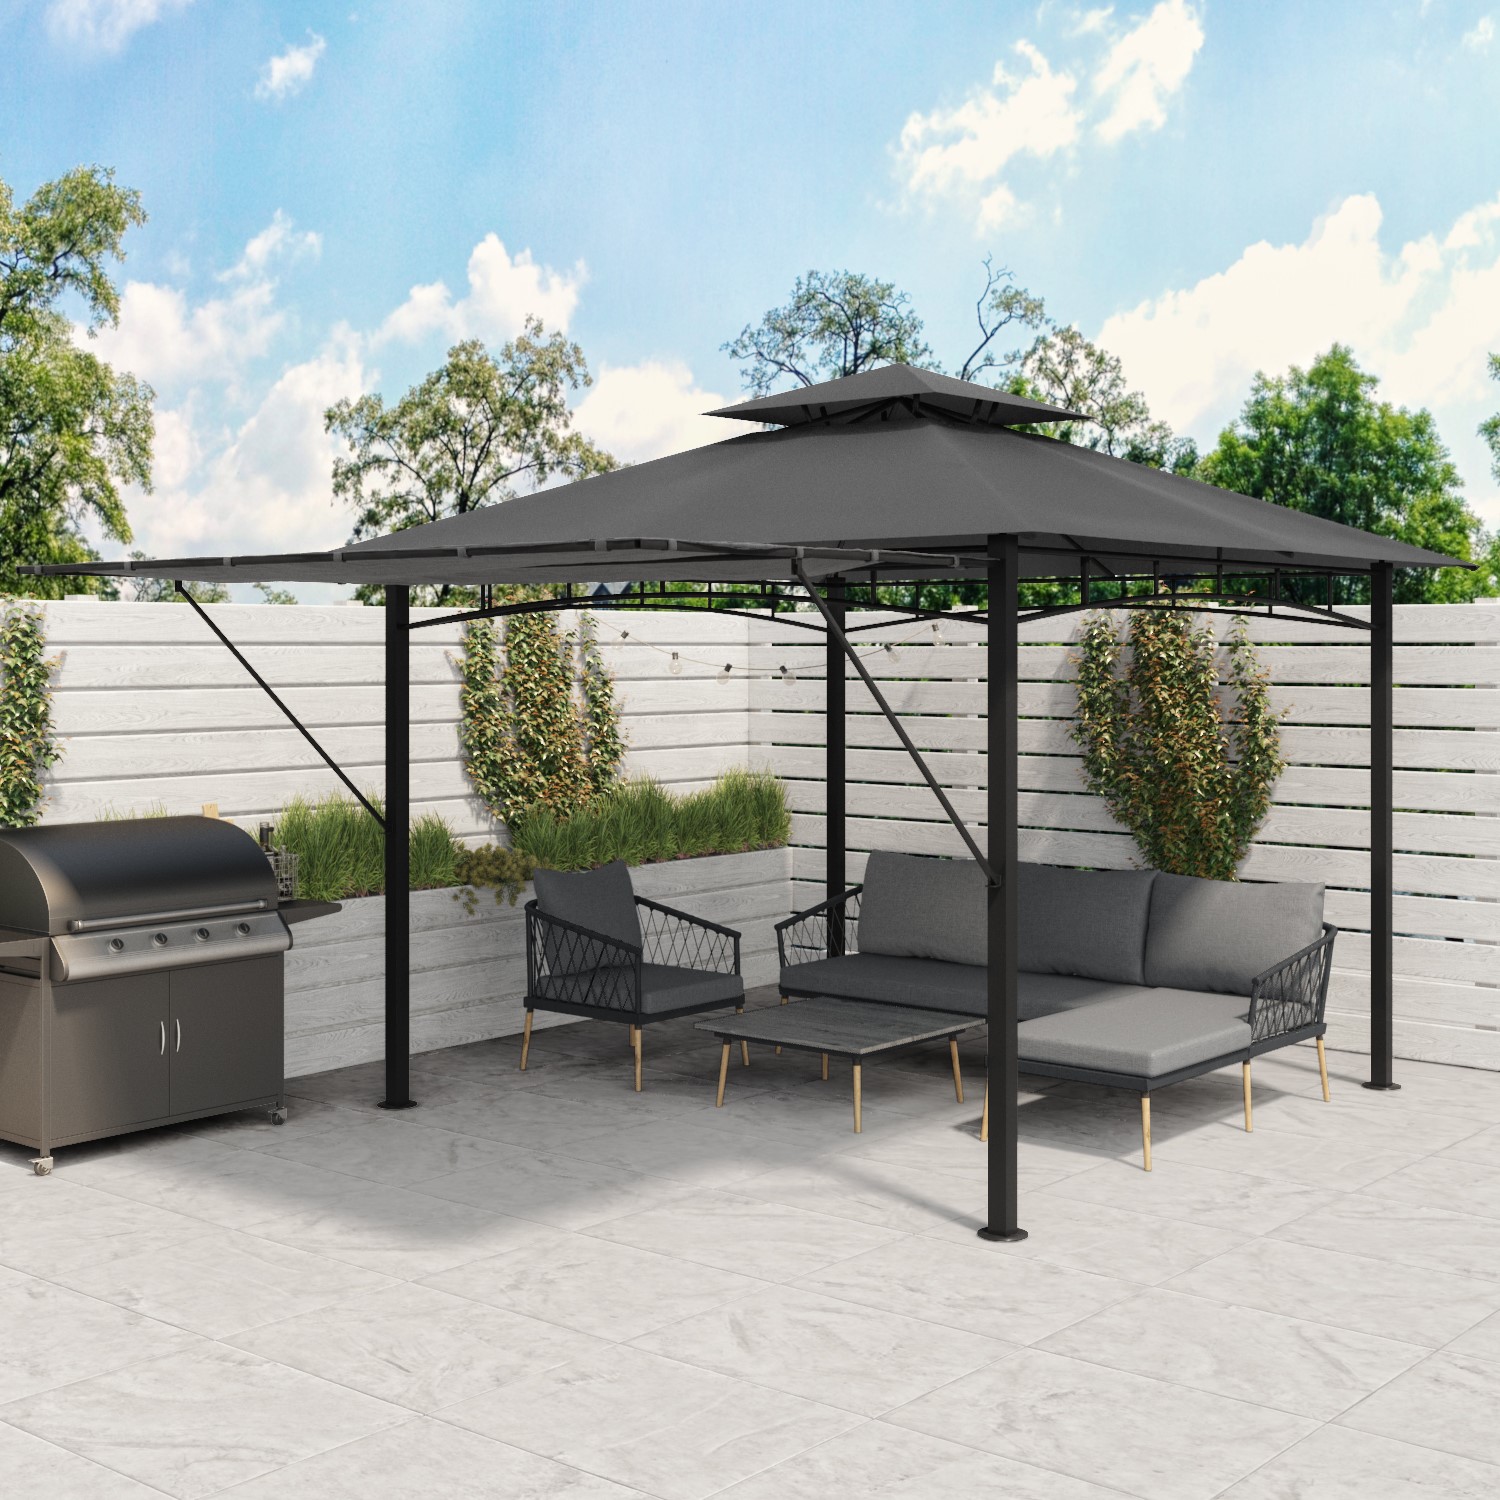 Read more about 3 x 3m dark grey and metal retractable side gazebo fortrose